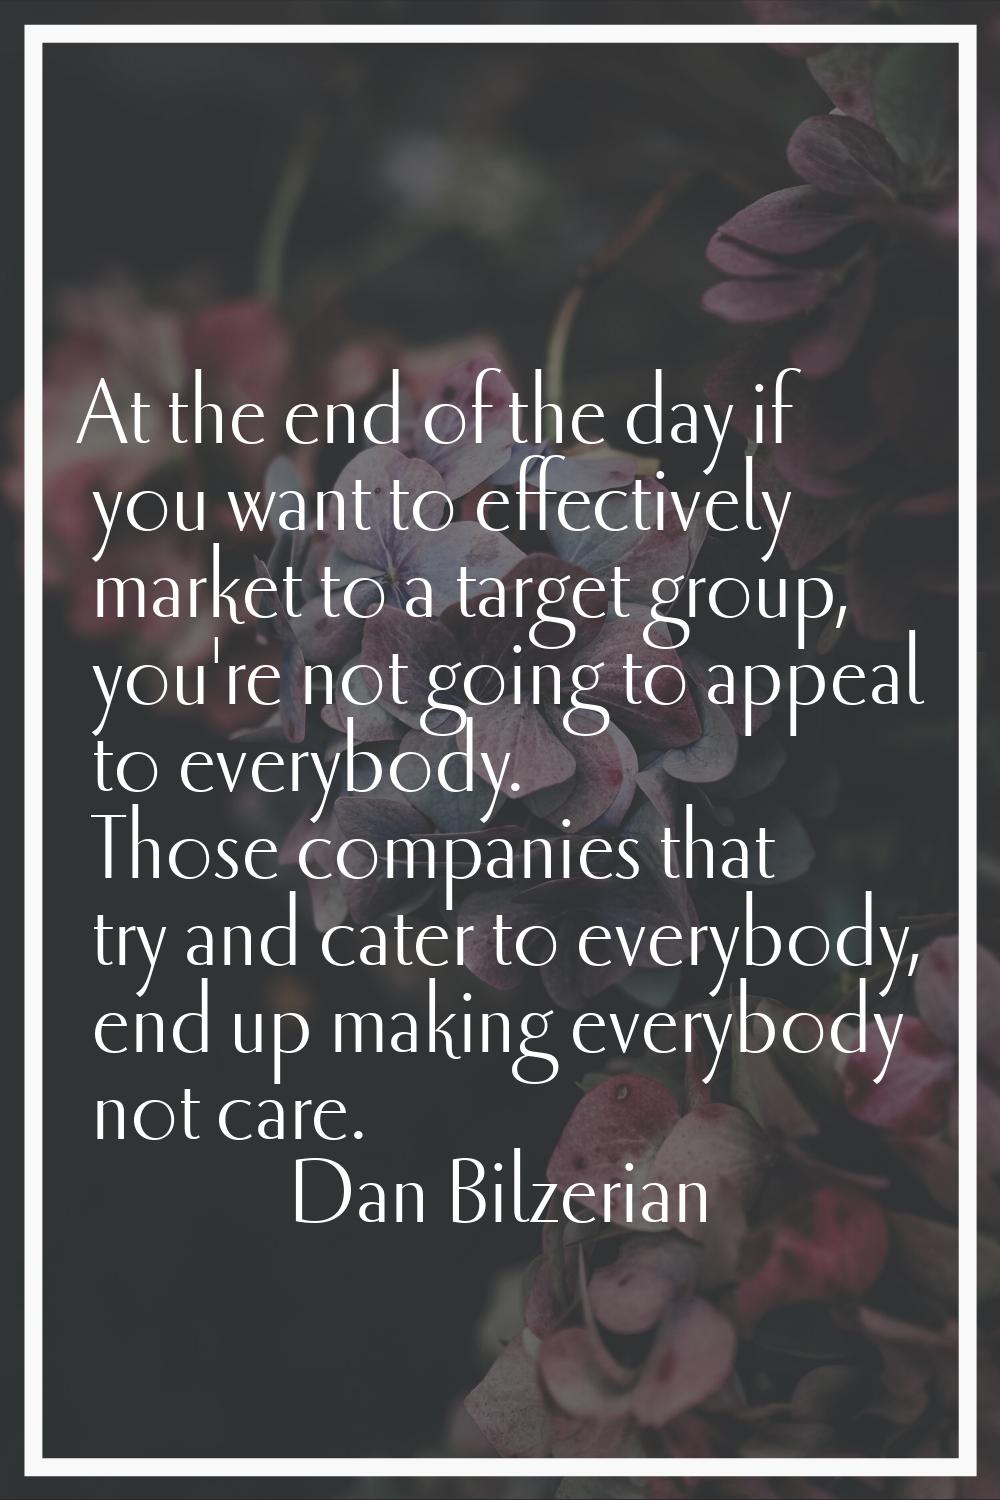 At the end of the day if you want to effectively market to a target group, you're not going to appe